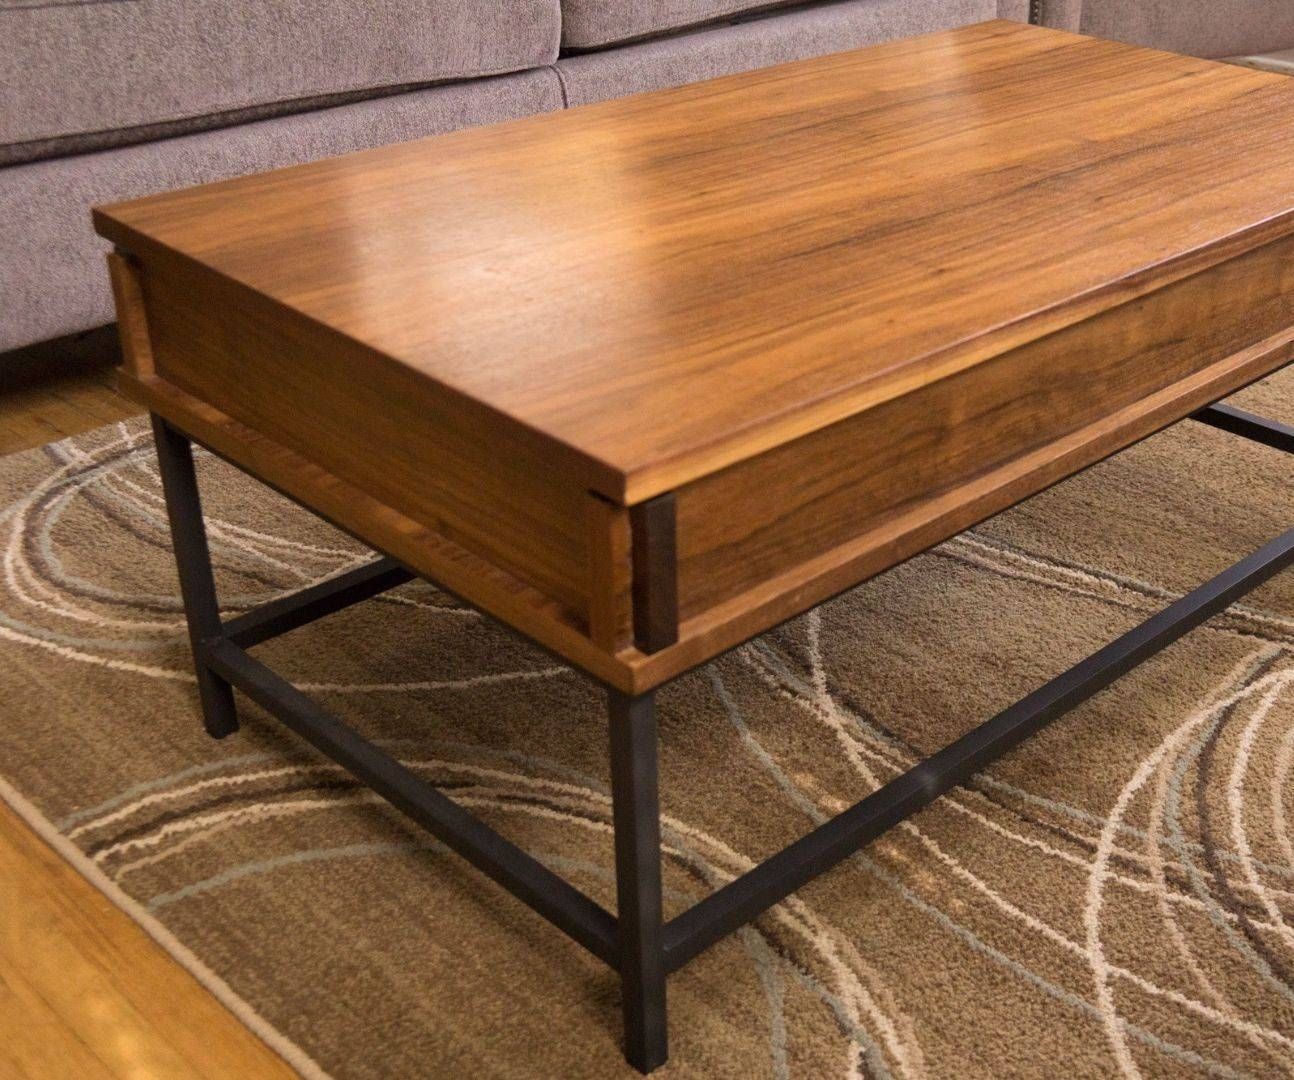 How To Make A Coffee Table With Lift Top: 18 Steps (with Pictures) Intended For Flip Up Coffee Tables (View 20 of 30)